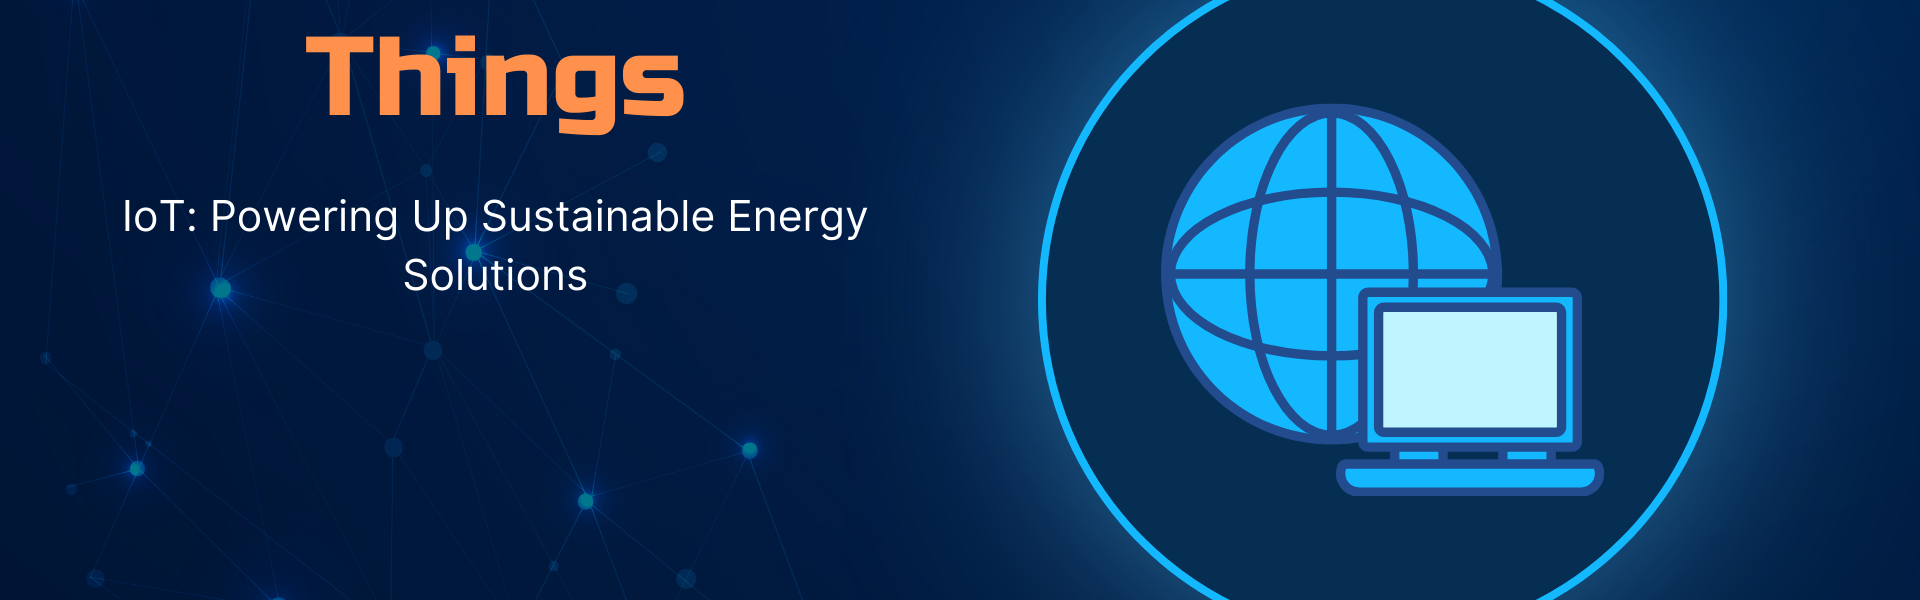 IoT: Powering Up Sustainable Energy Solutions